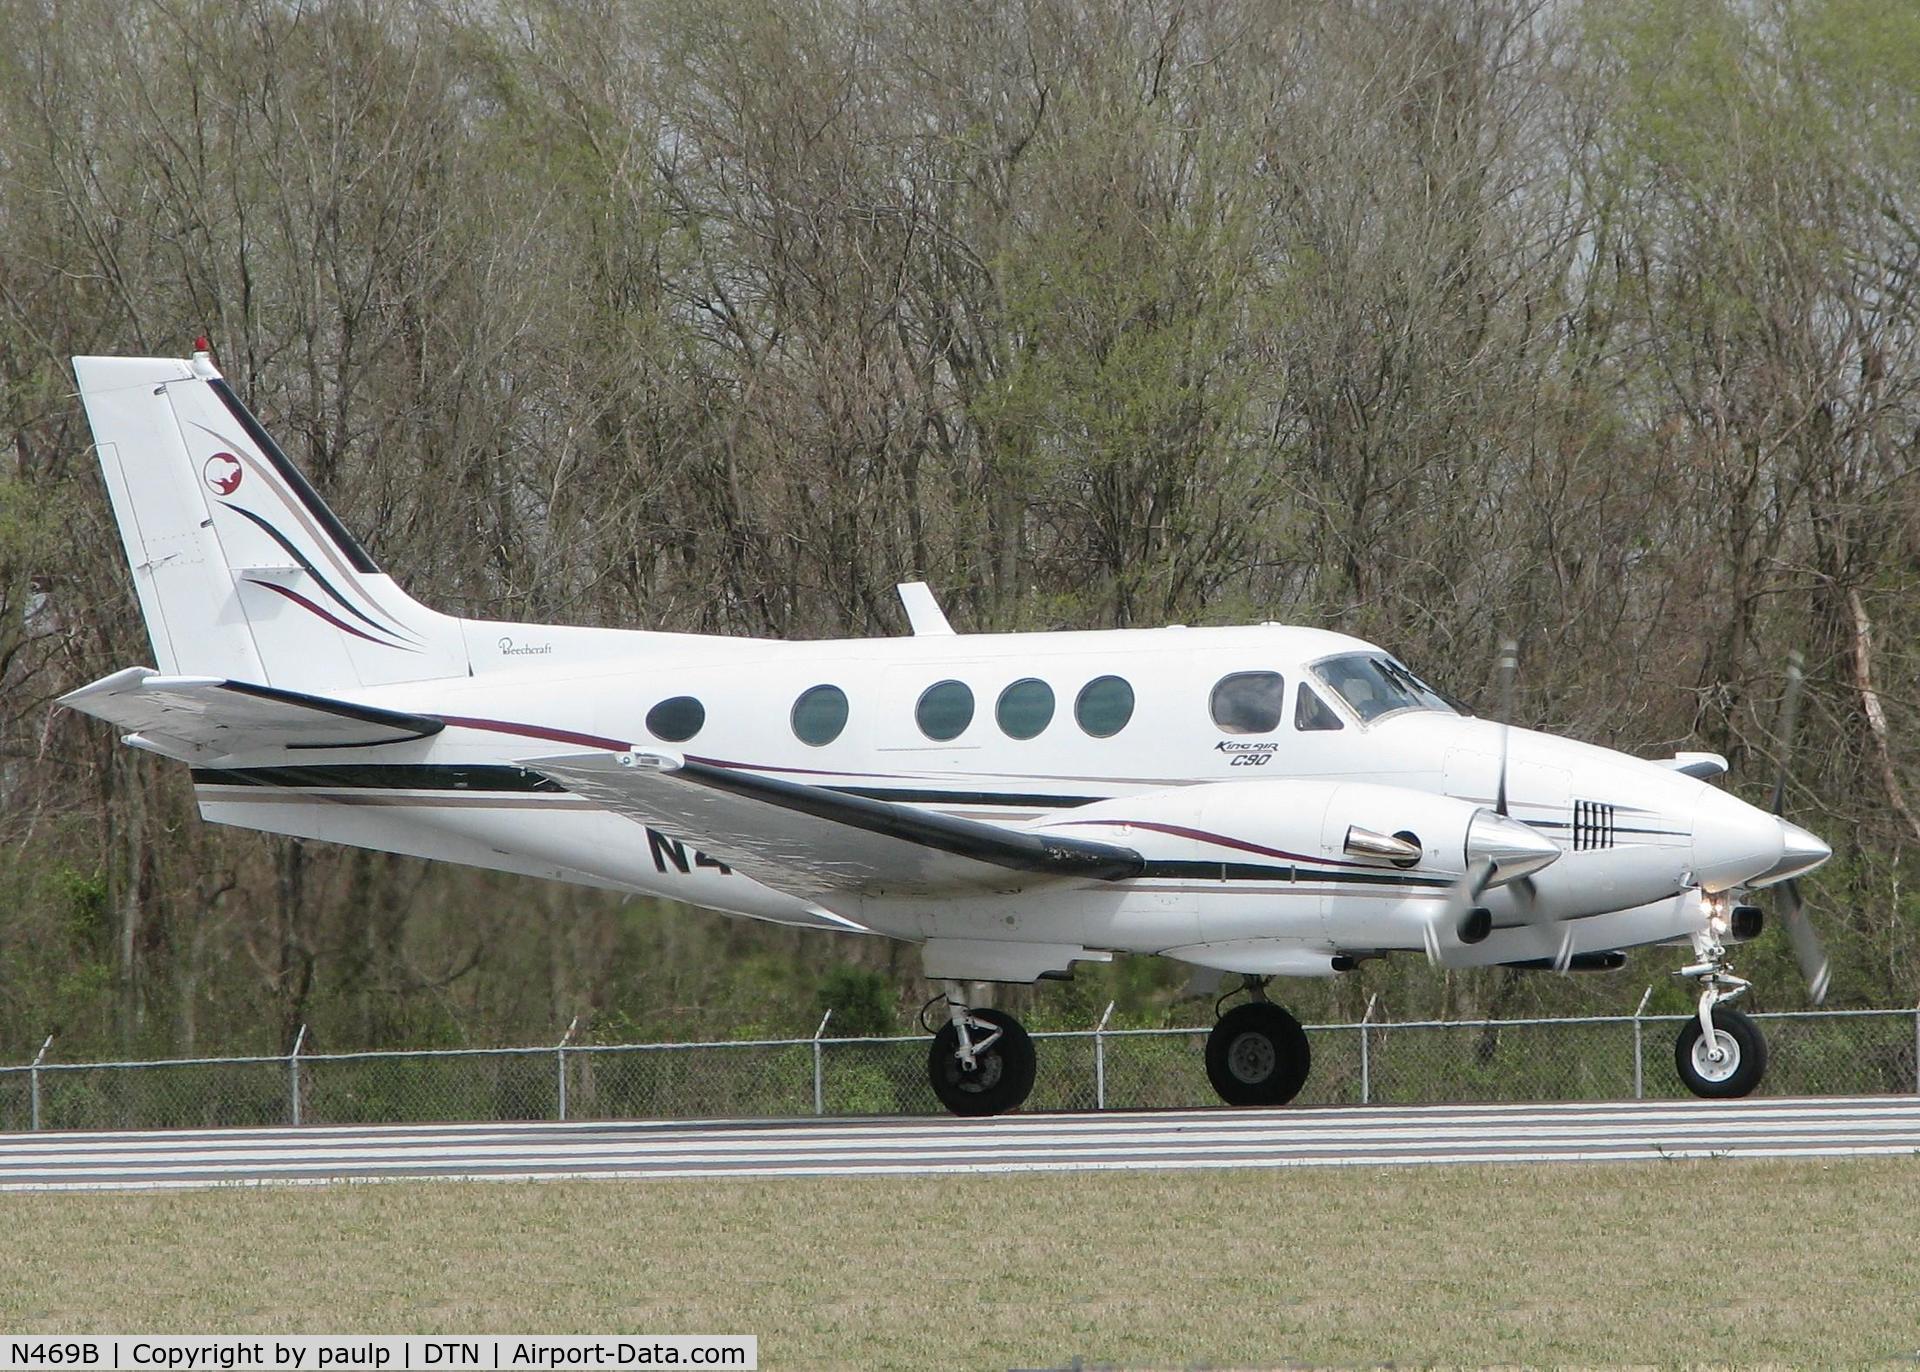 N469B, 1978 Beech C90 King Air C/N LJ-803, Taking off on Rwy 14 at the Shreveport Downtown Airport.